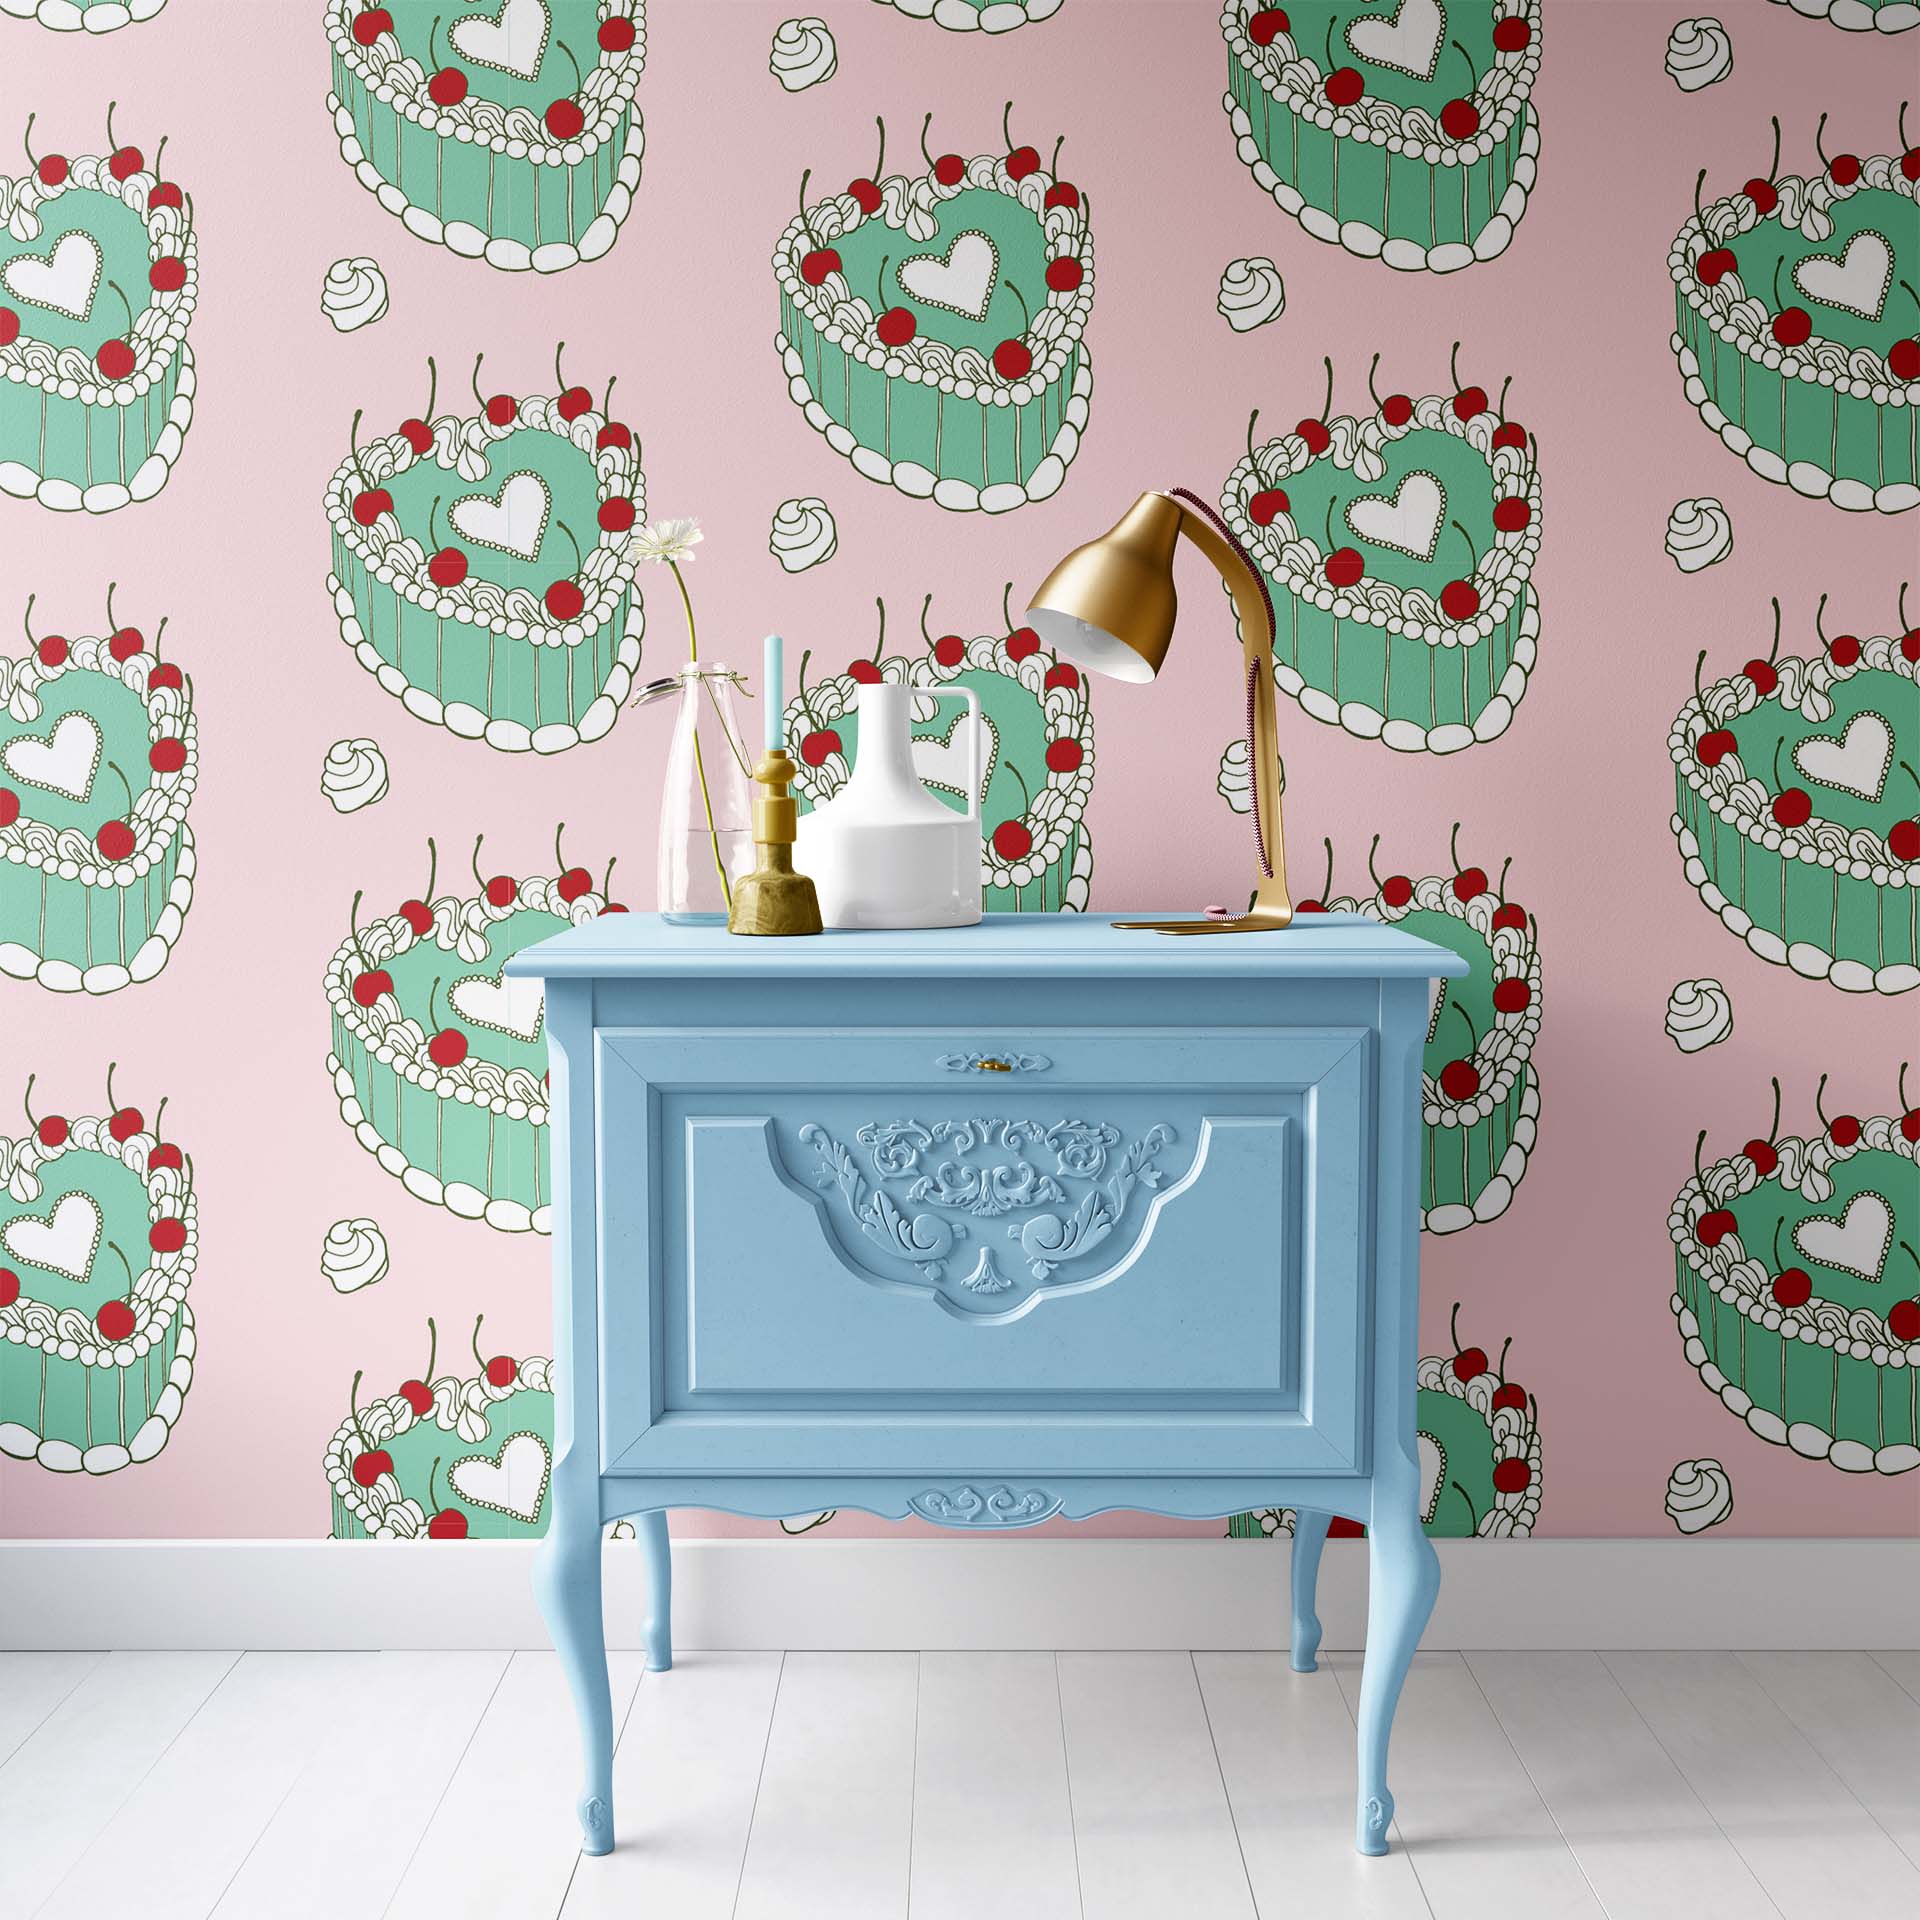 I painted the wallpaper in my Alice in Wonderland kitchen making a